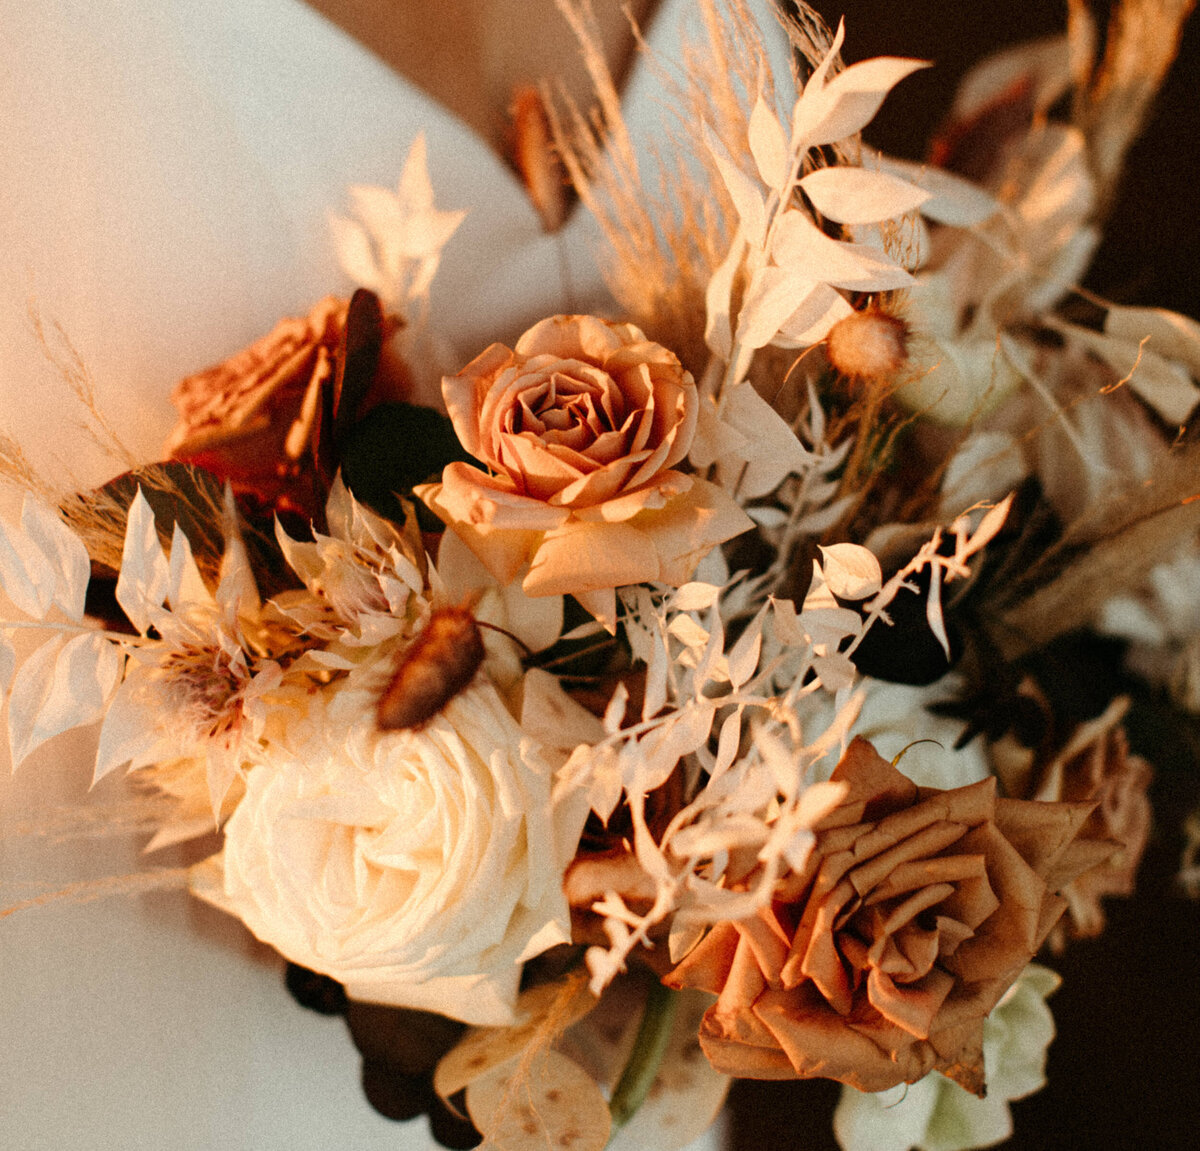 Bridal bouquet with a mixture of dried florals and real roses